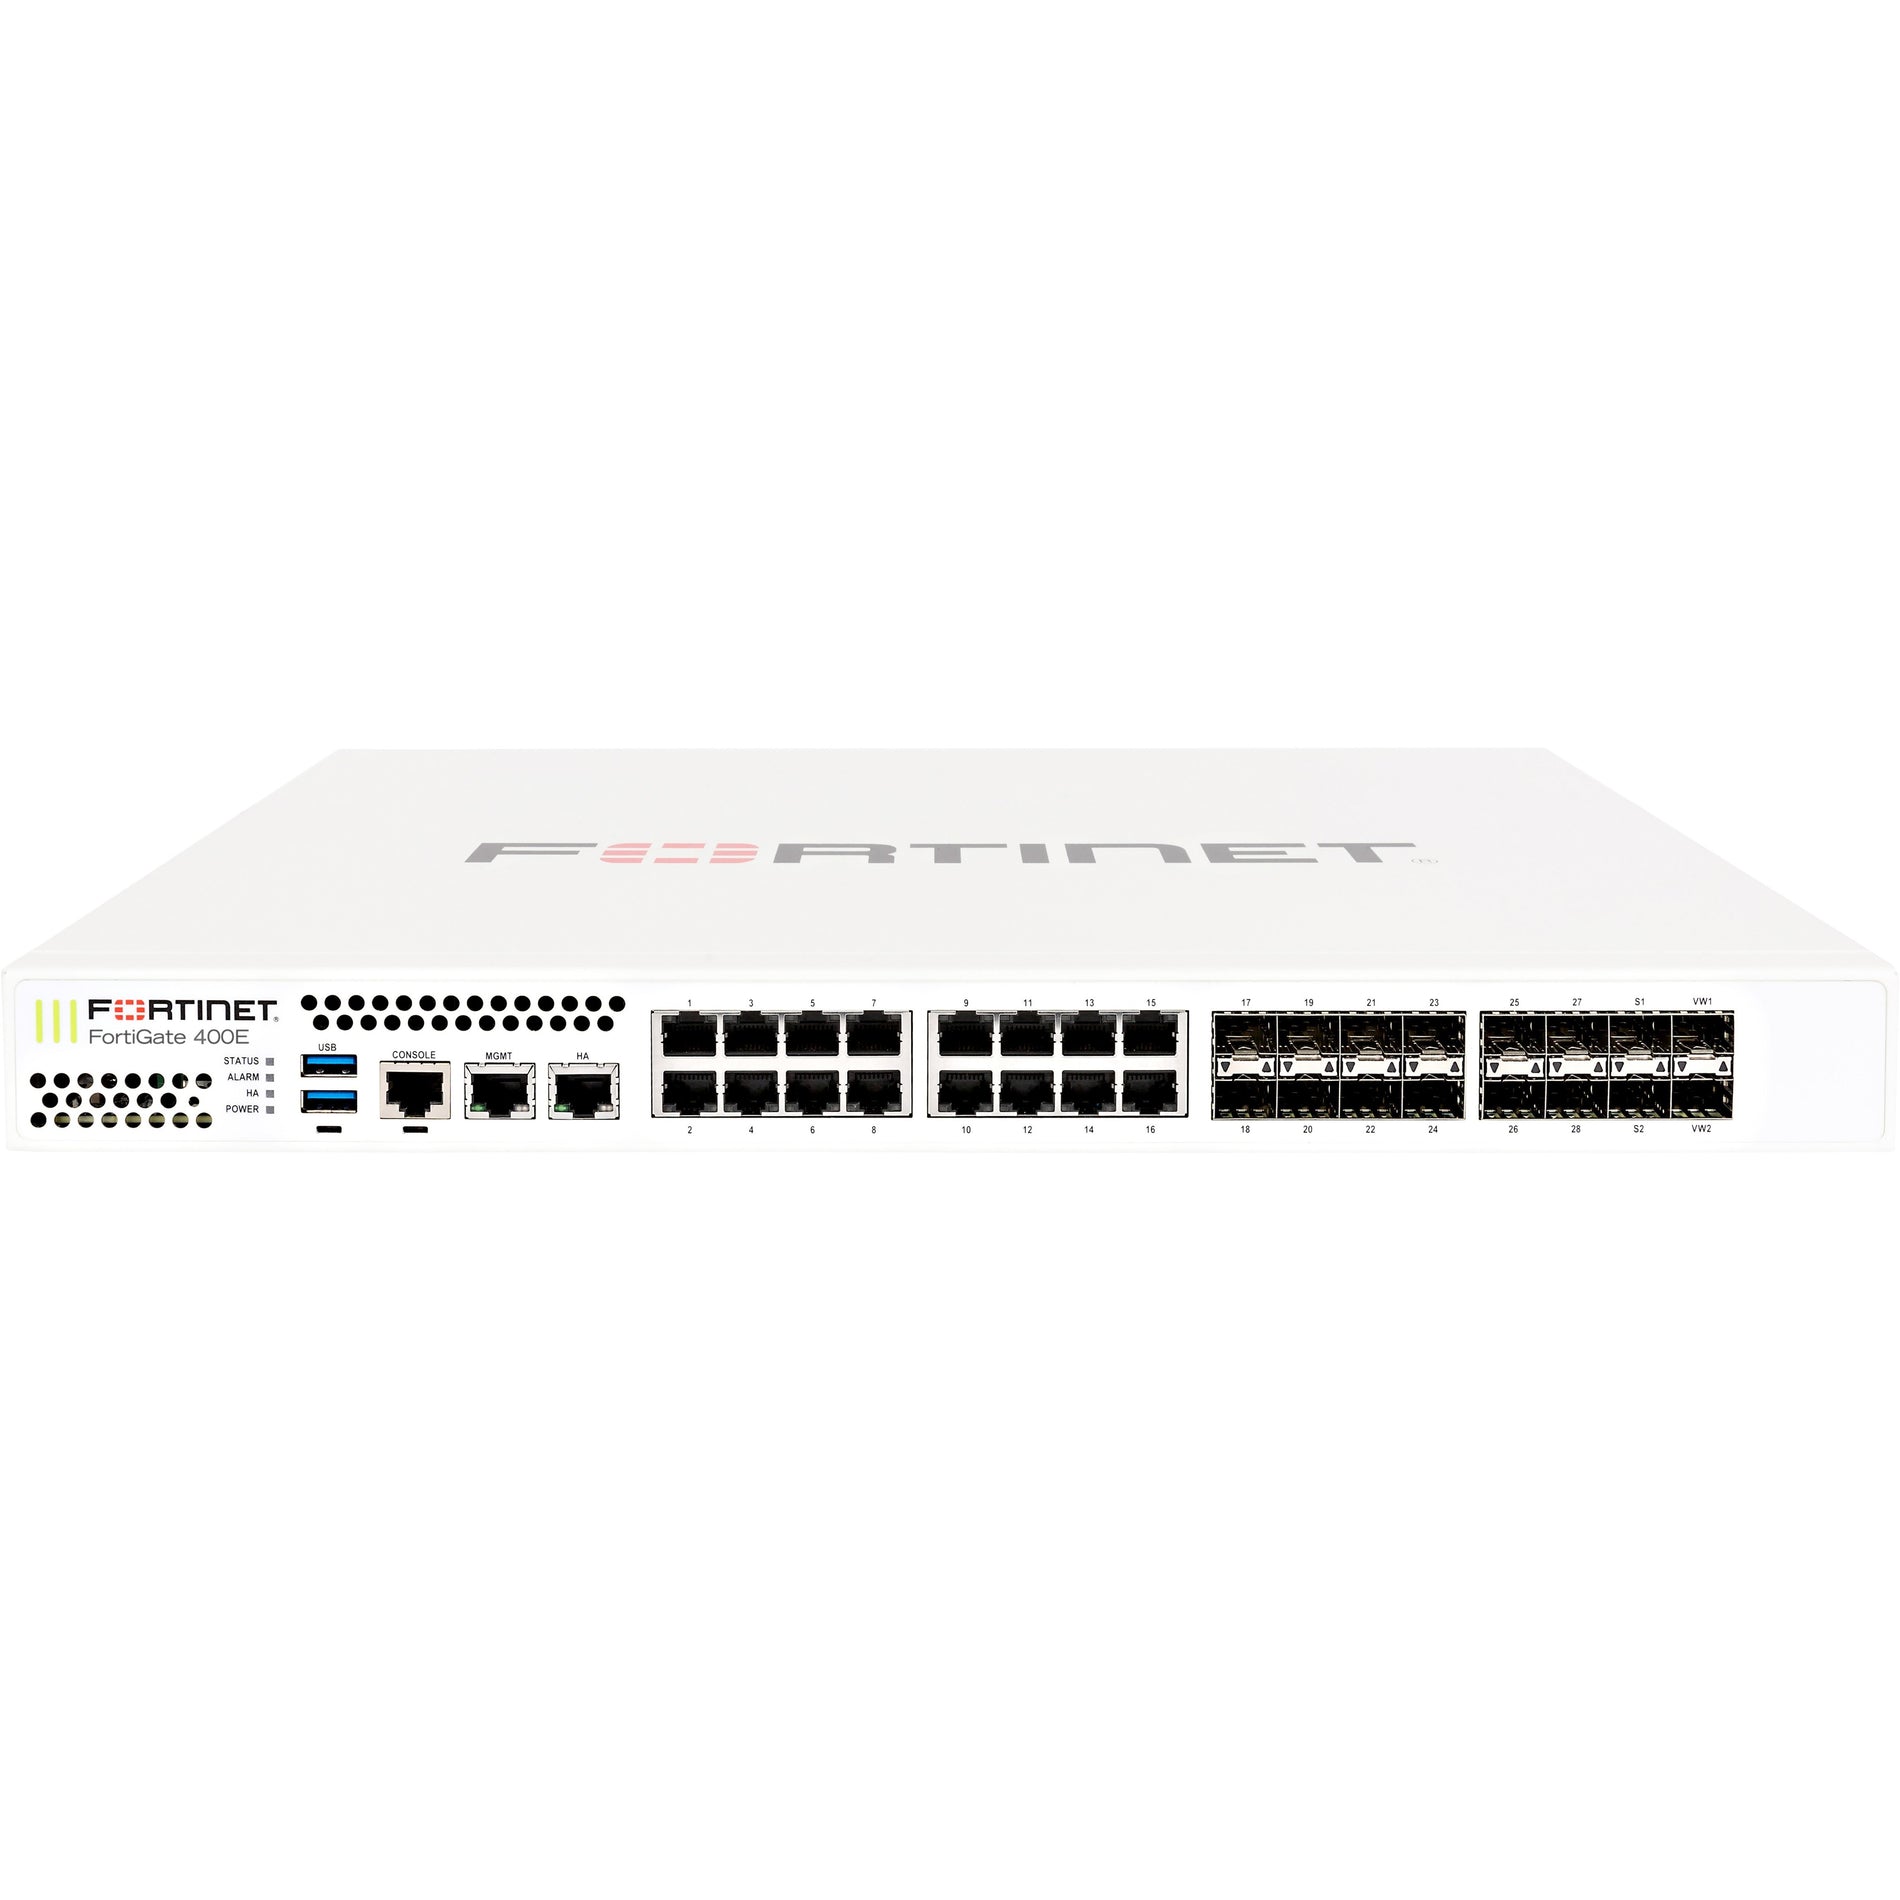 Fortinet FG-401E FortiGate Network Security/Firewall Appliance, 16 SFP Slots, 18 Ports